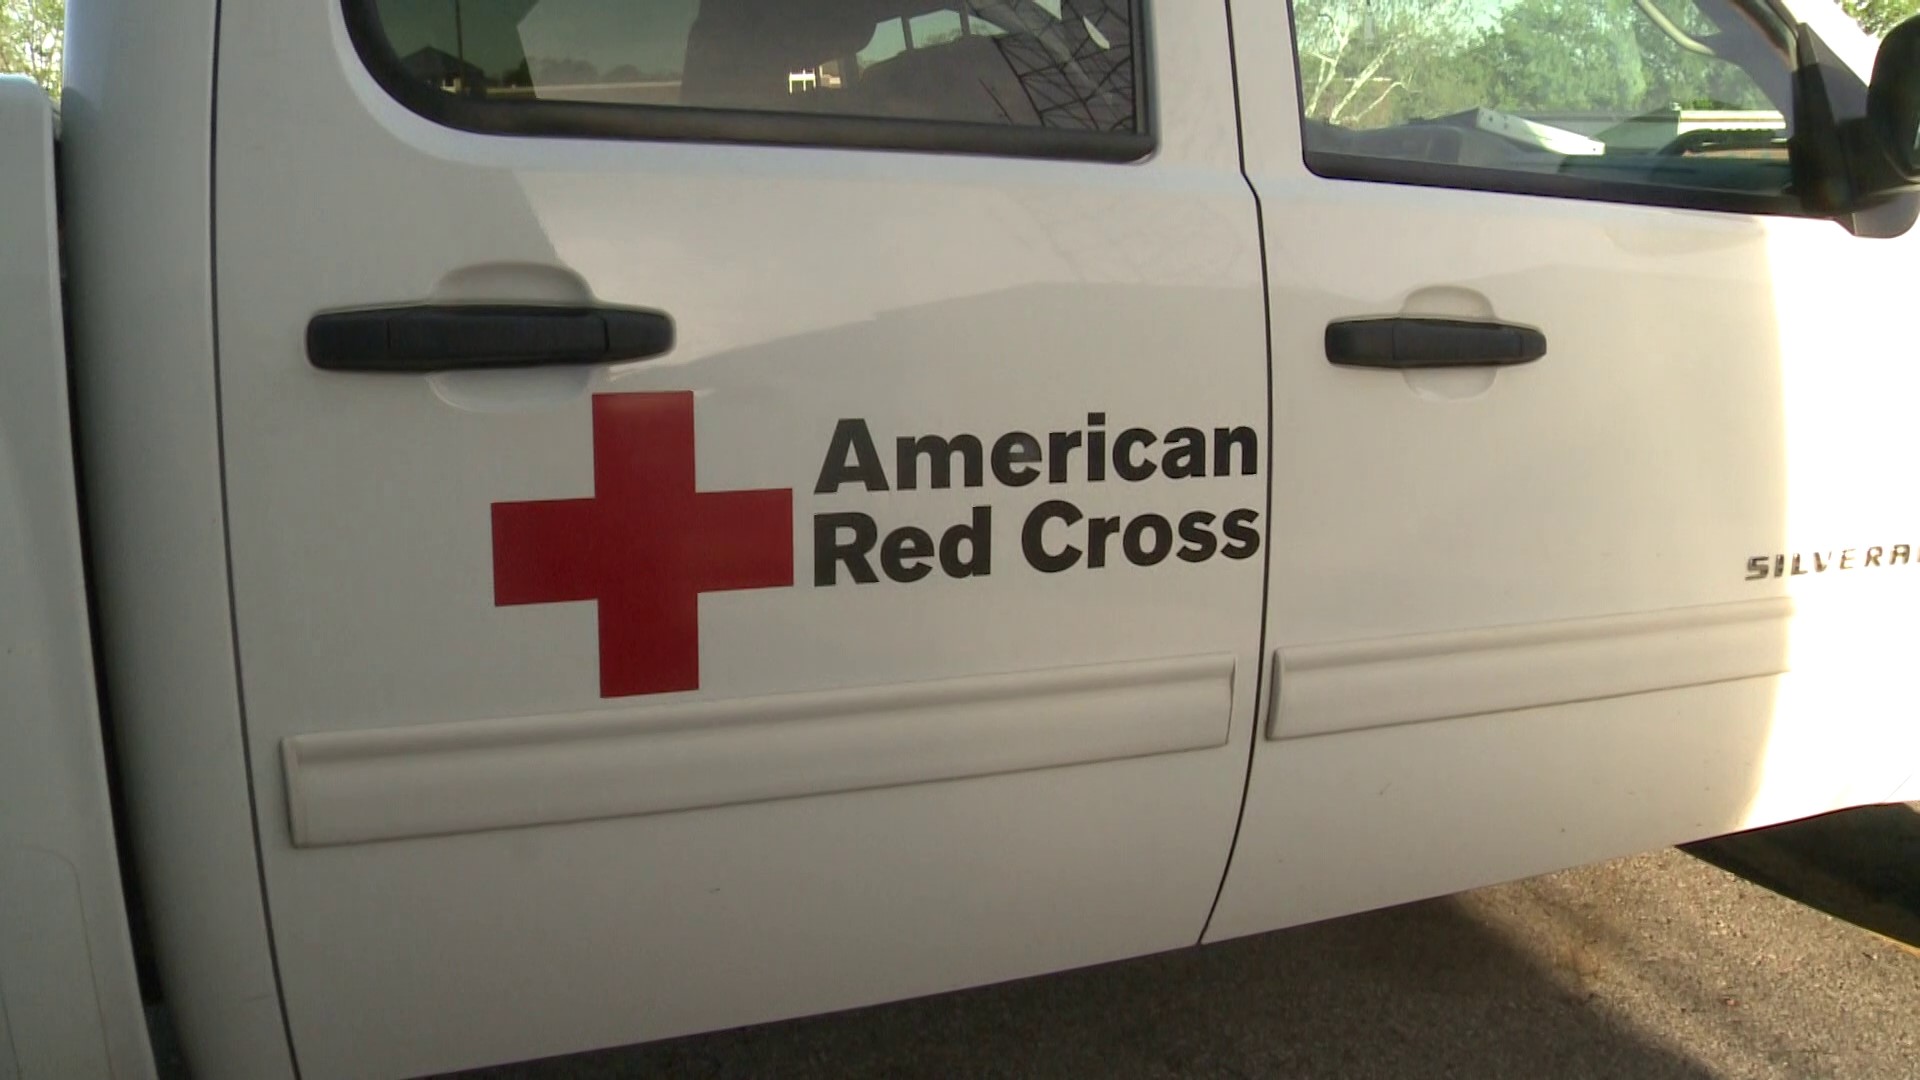 As of Wednesday morning, 20 volunteers from across the region offered their services: 11 volunteers are on the ground in impacted areas while nine are on the way.